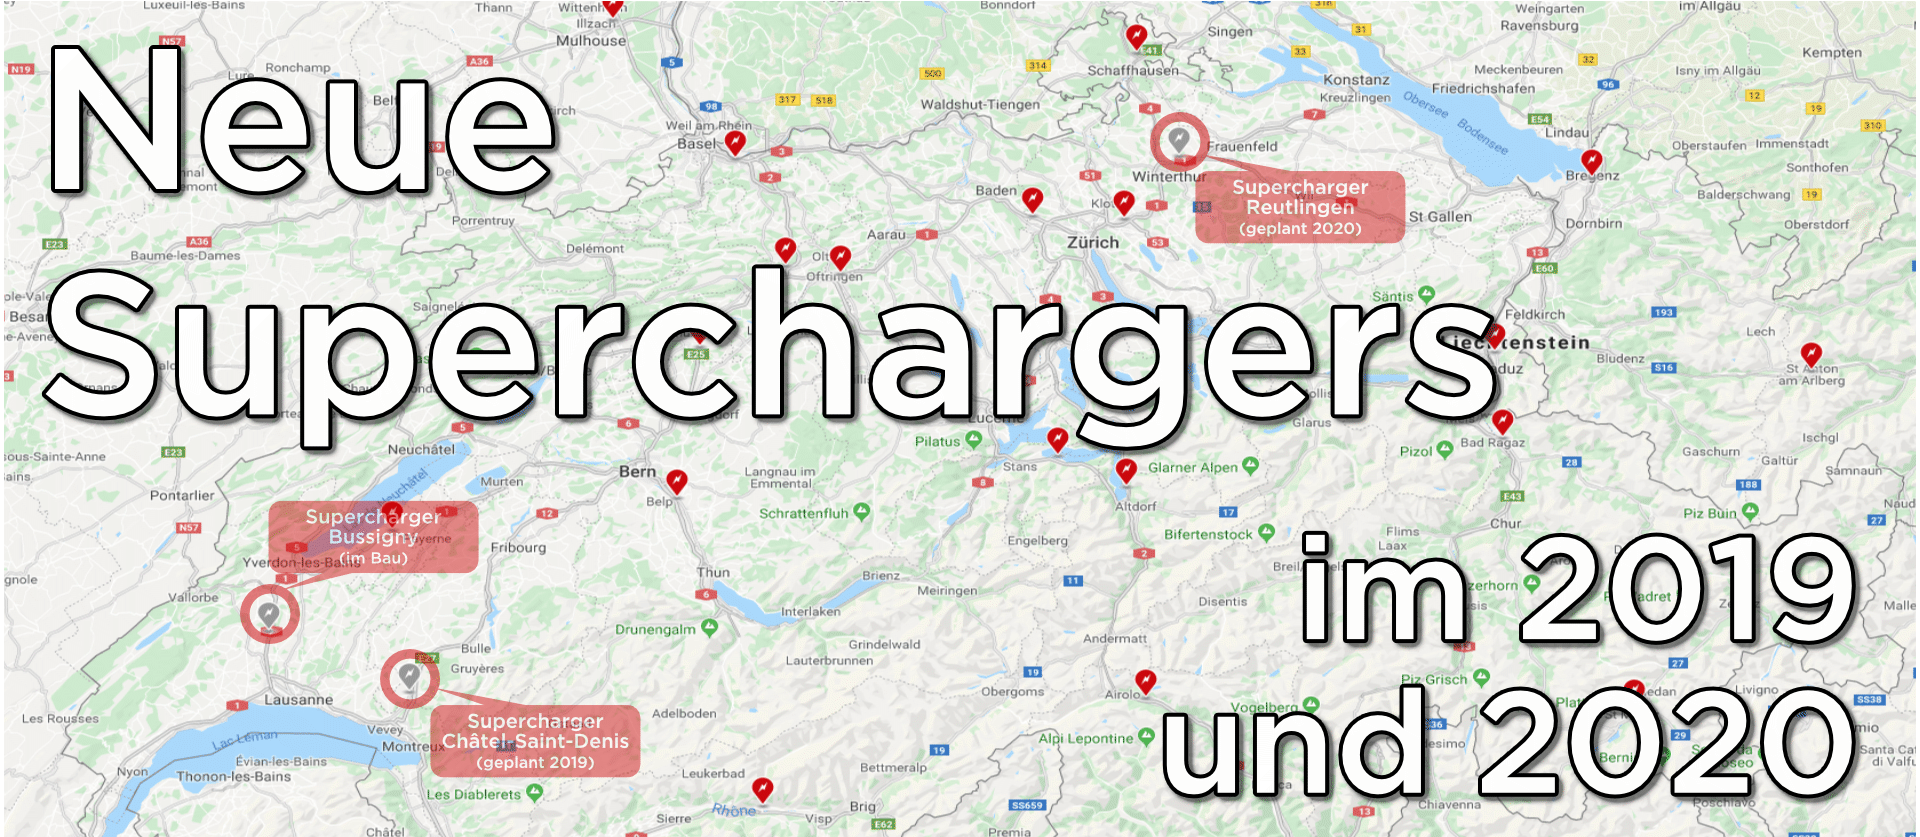 You are currently viewing Neue Supercharger im 2019 und 2020